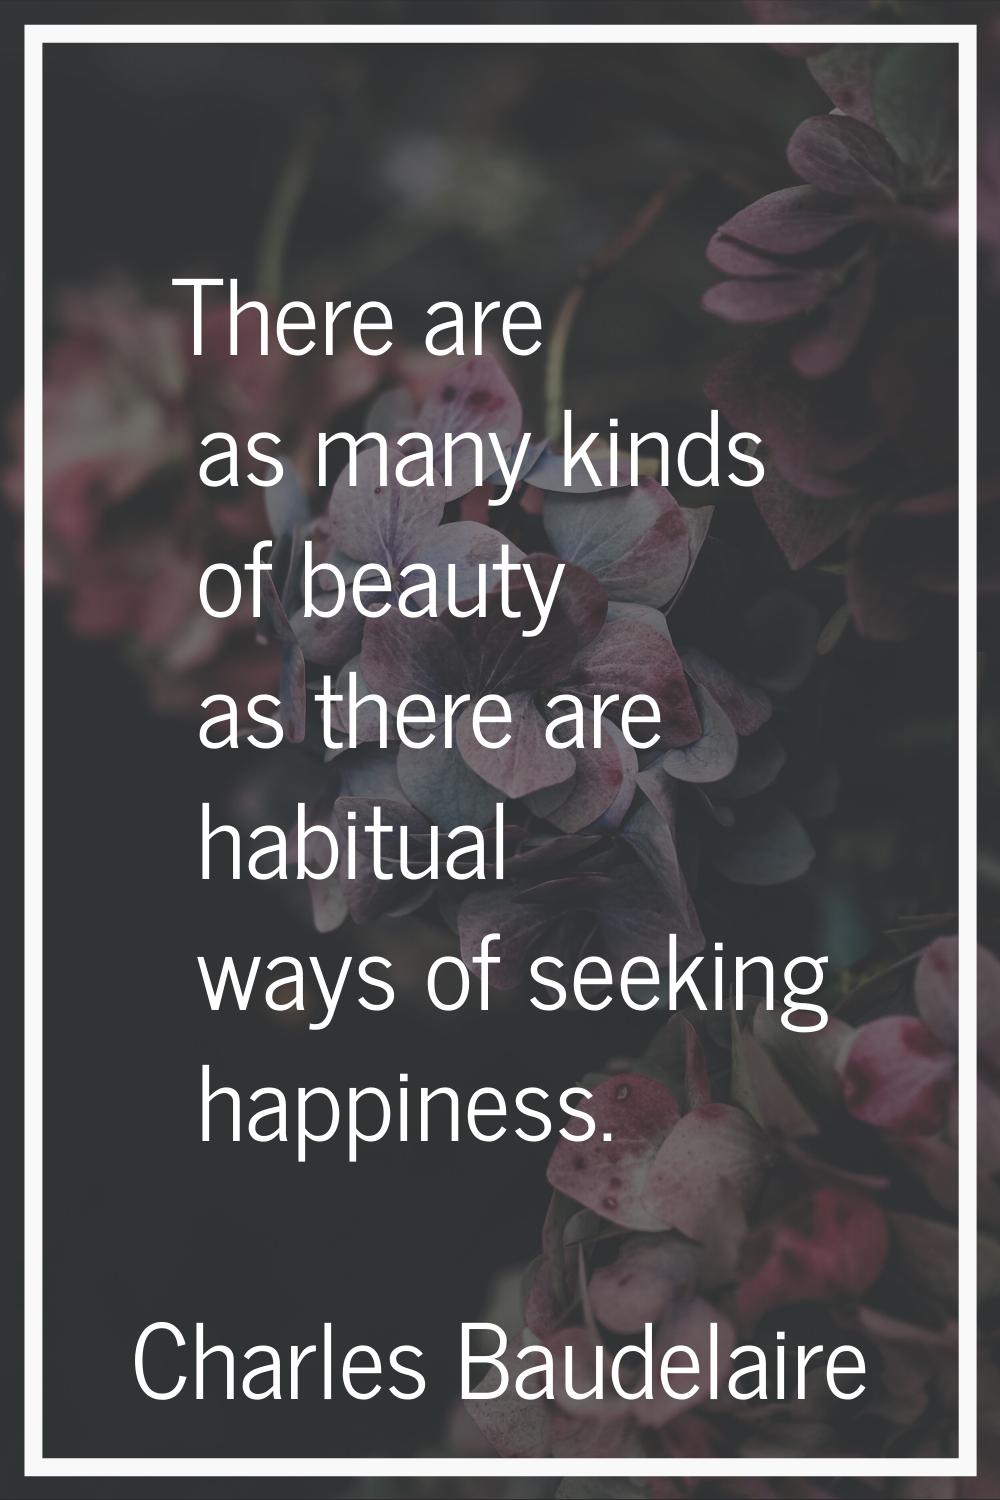 There are as many kinds of beauty as there are habitual ways of seeking happiness.